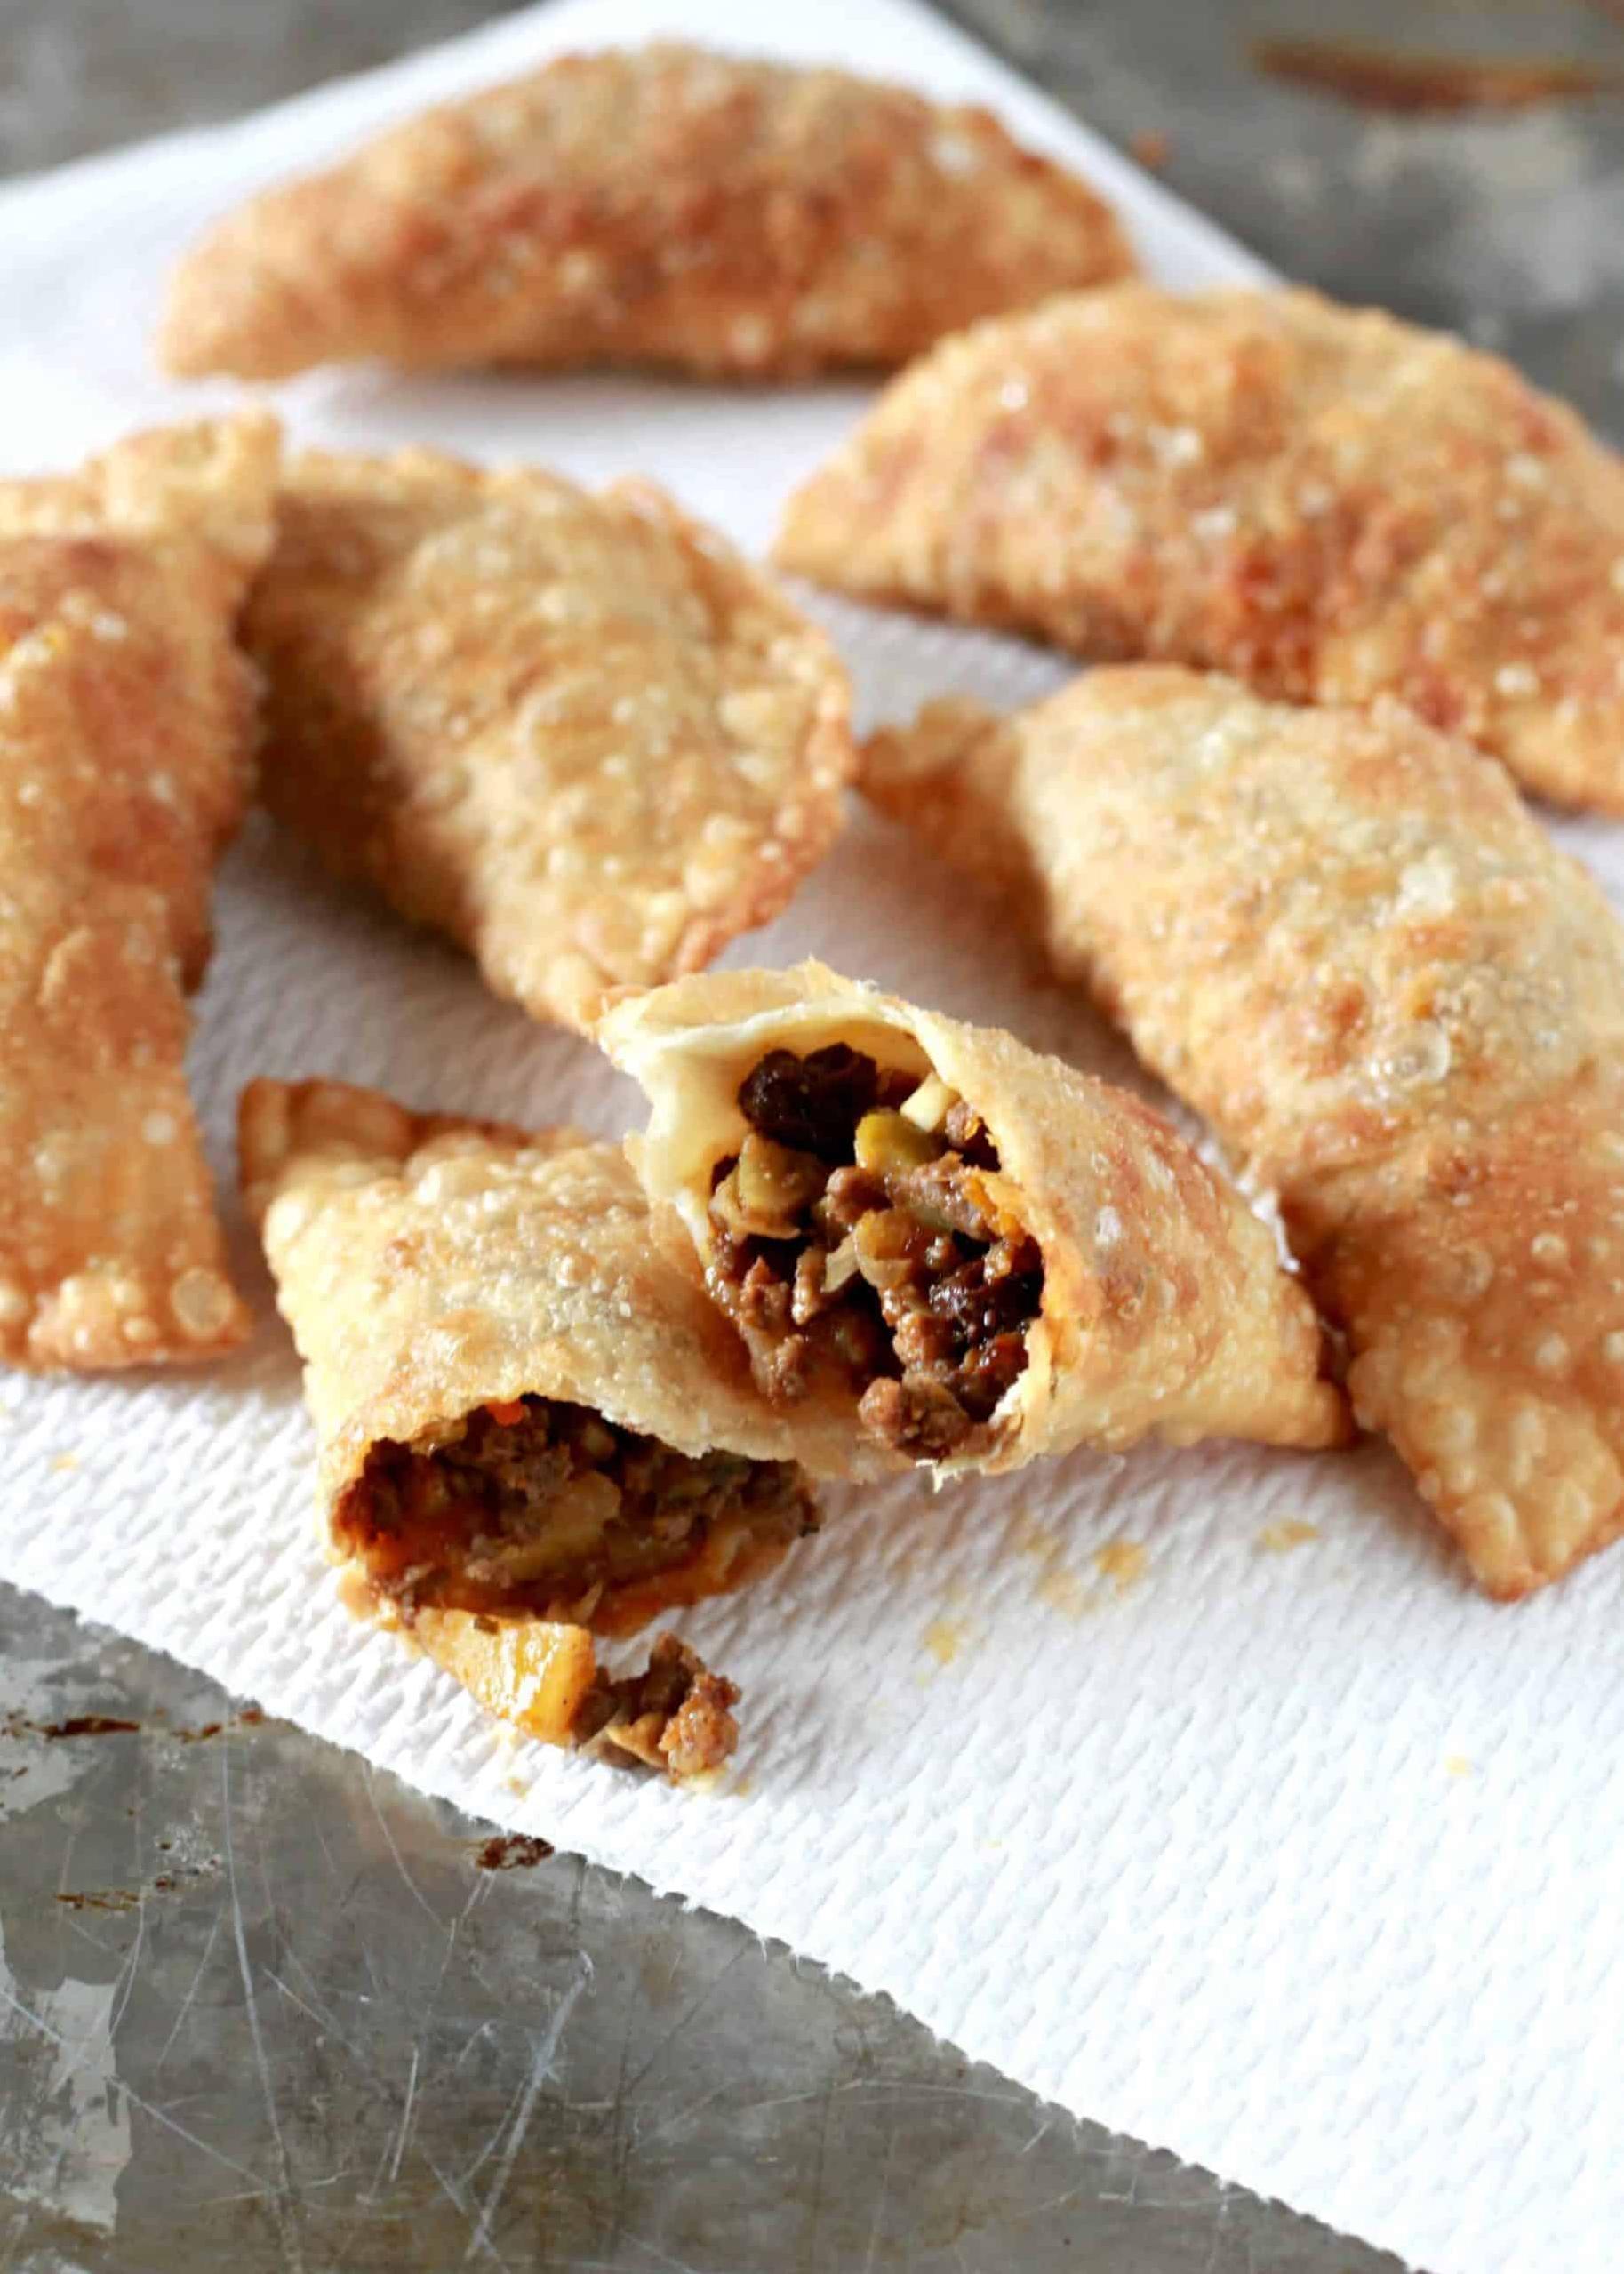  Piping hot and fresh out of the fryer- these pastries are a must-try appetizer.